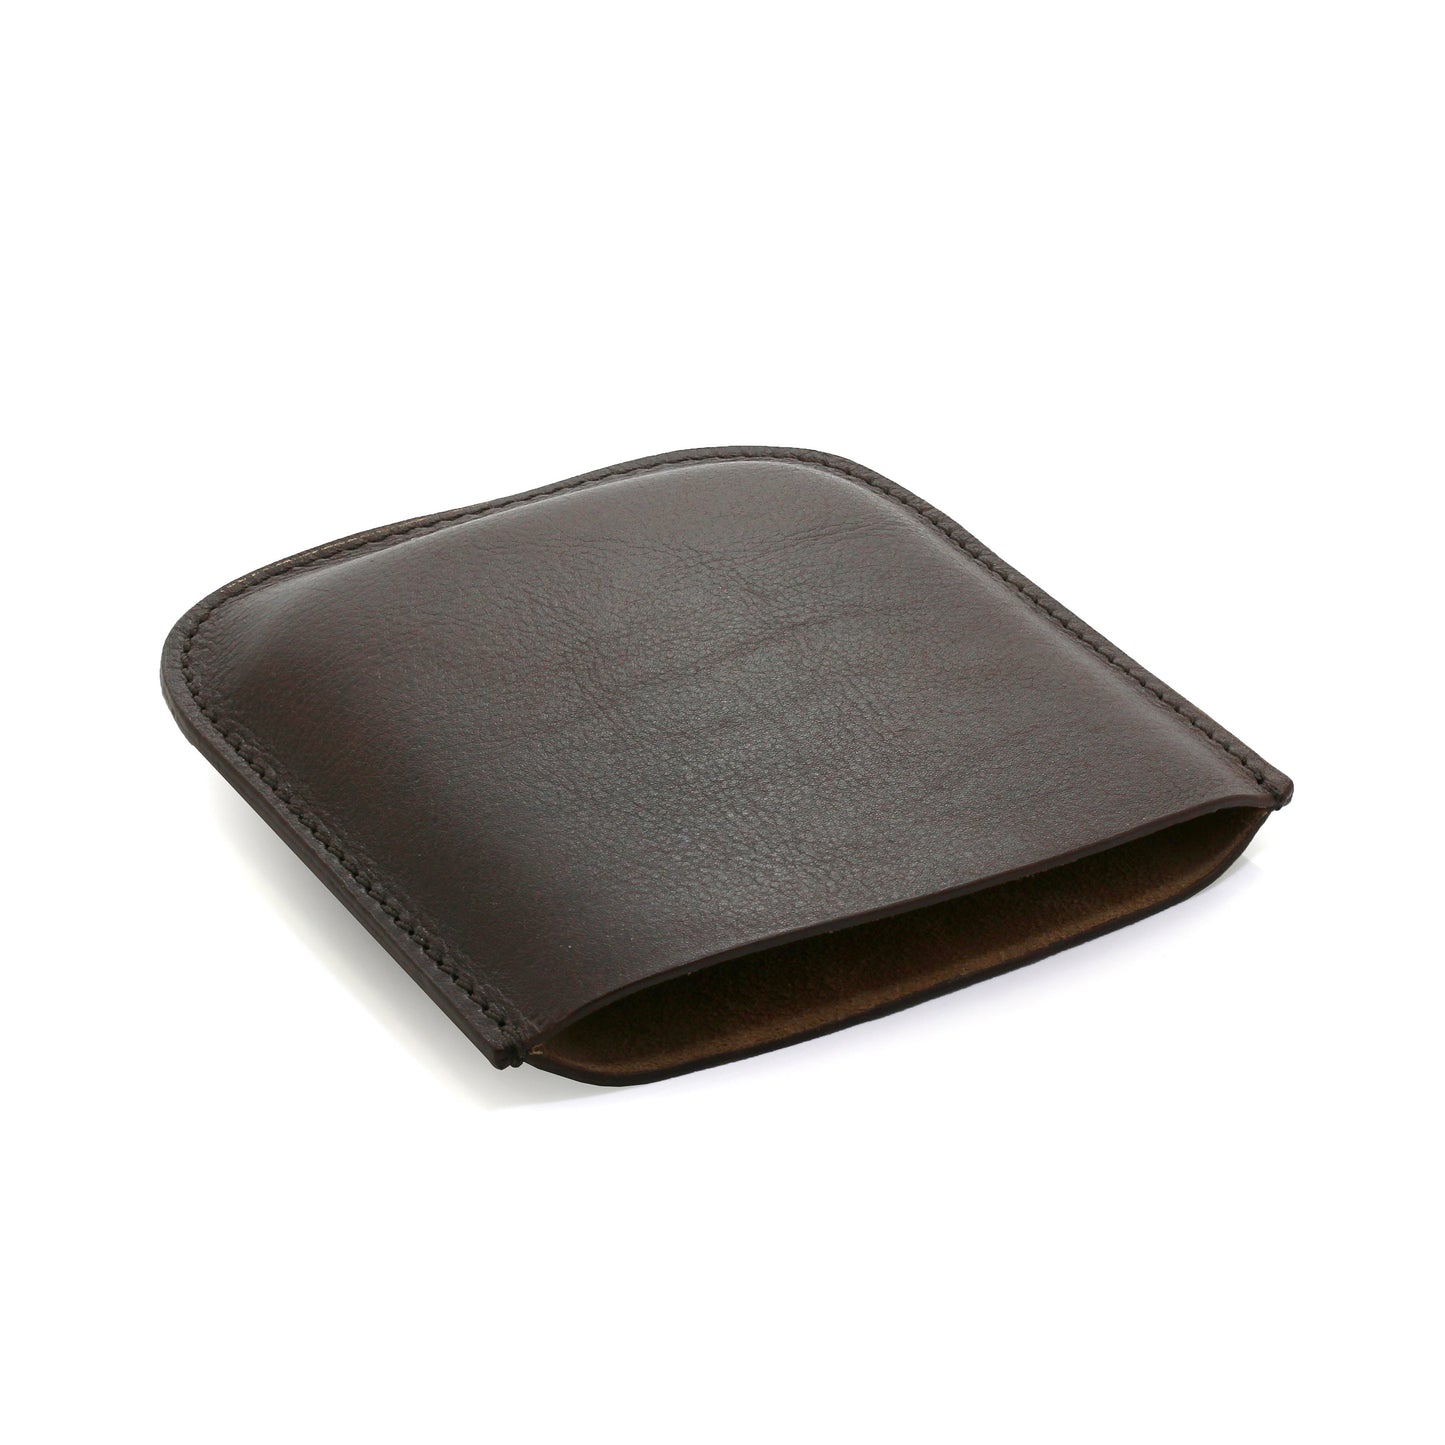 Genuine Brown Leather Hip Flask Pouch